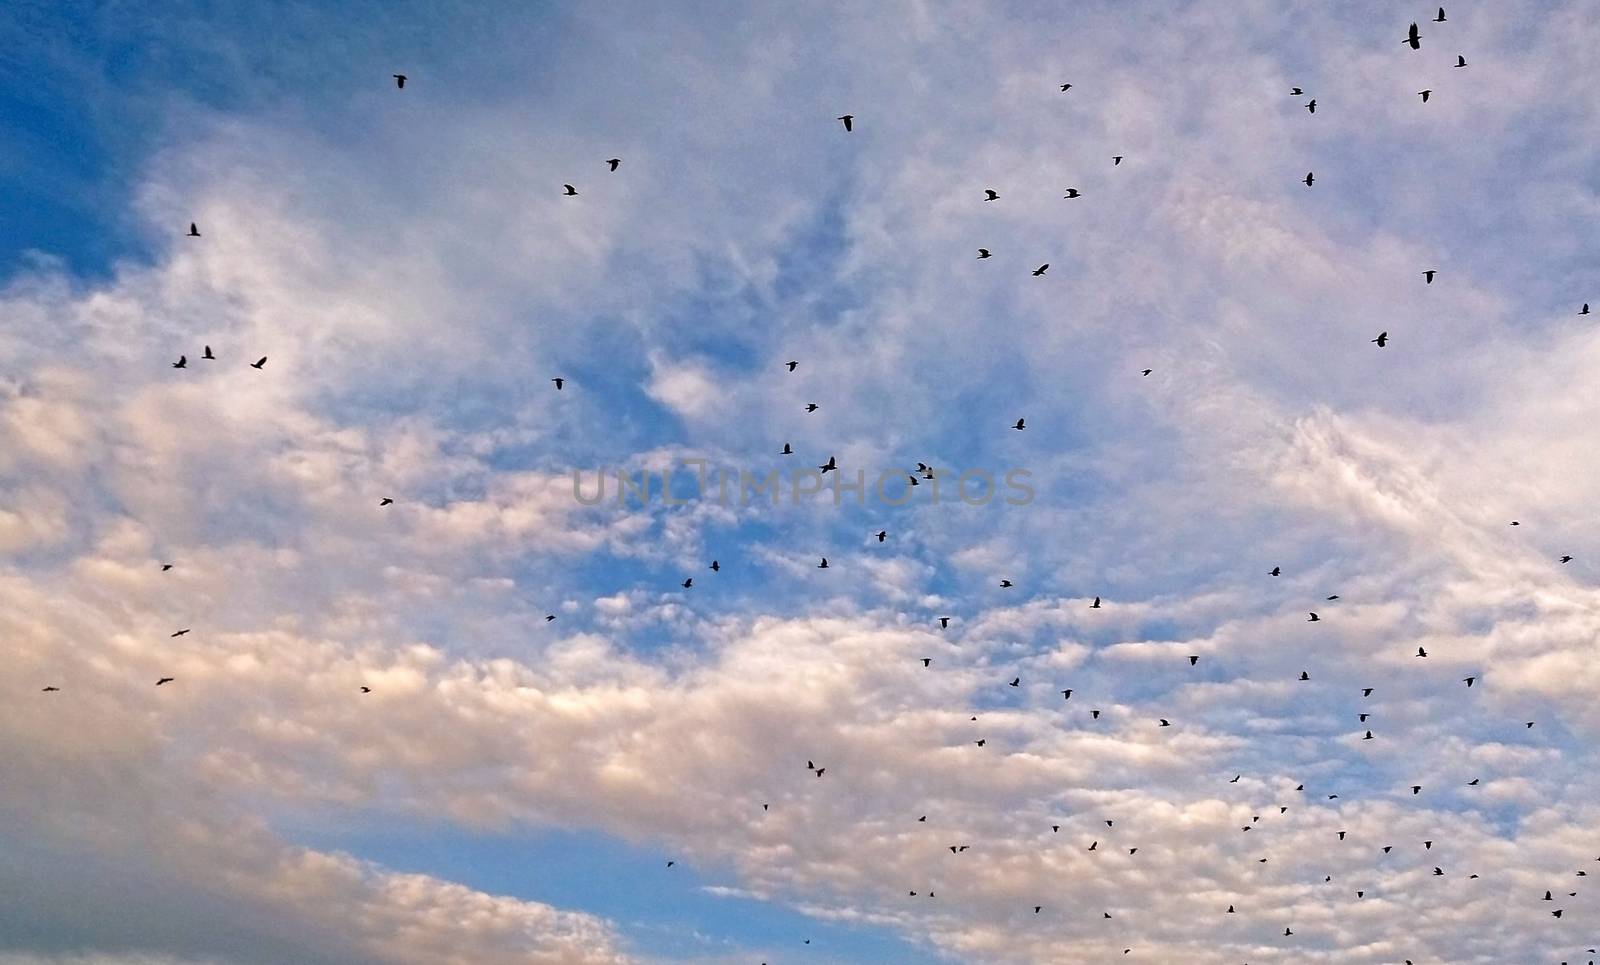 Some rook birds flying in the cloudy sky